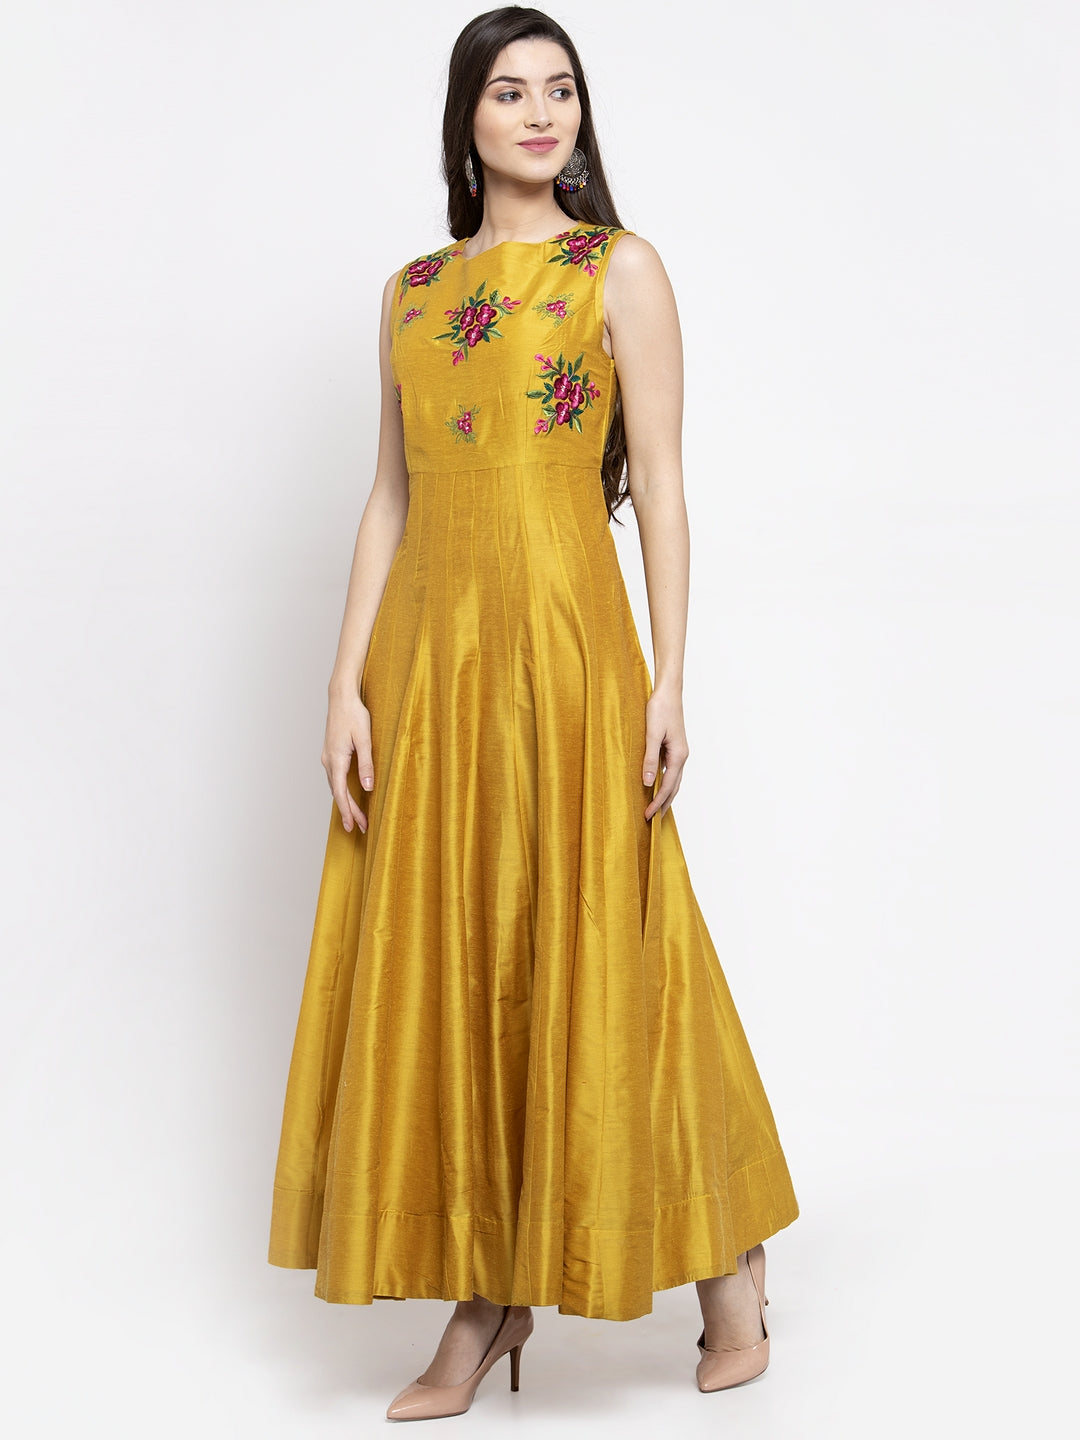 Mustrad Yellow Foral Ethnic Maxi Dress